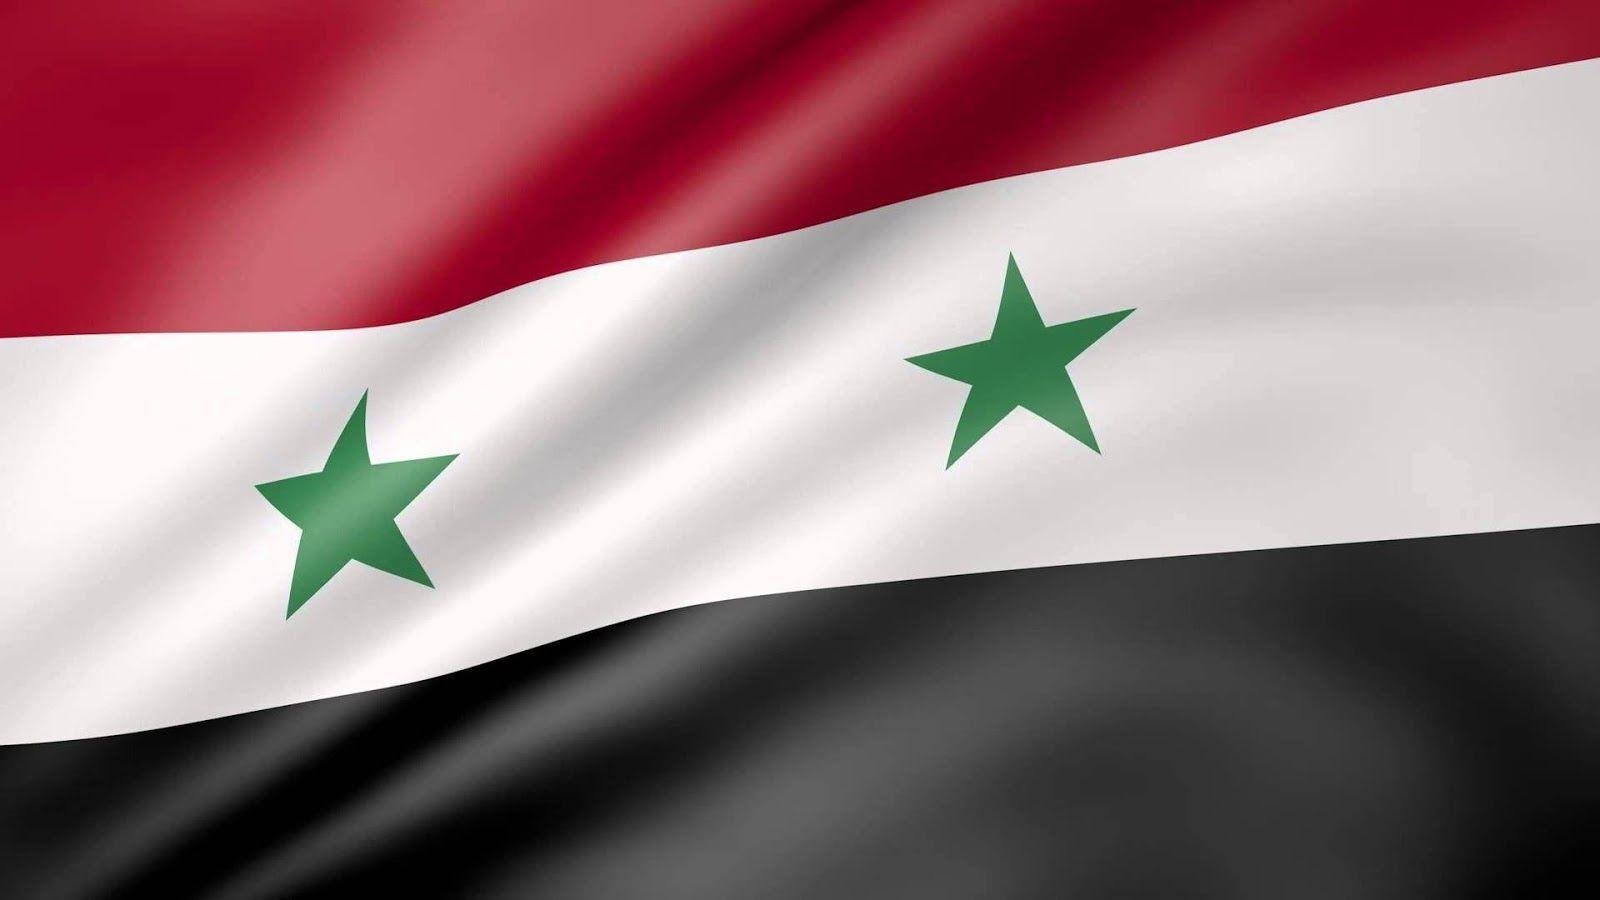 Syria Flag Wallpaper Apps on Google Play